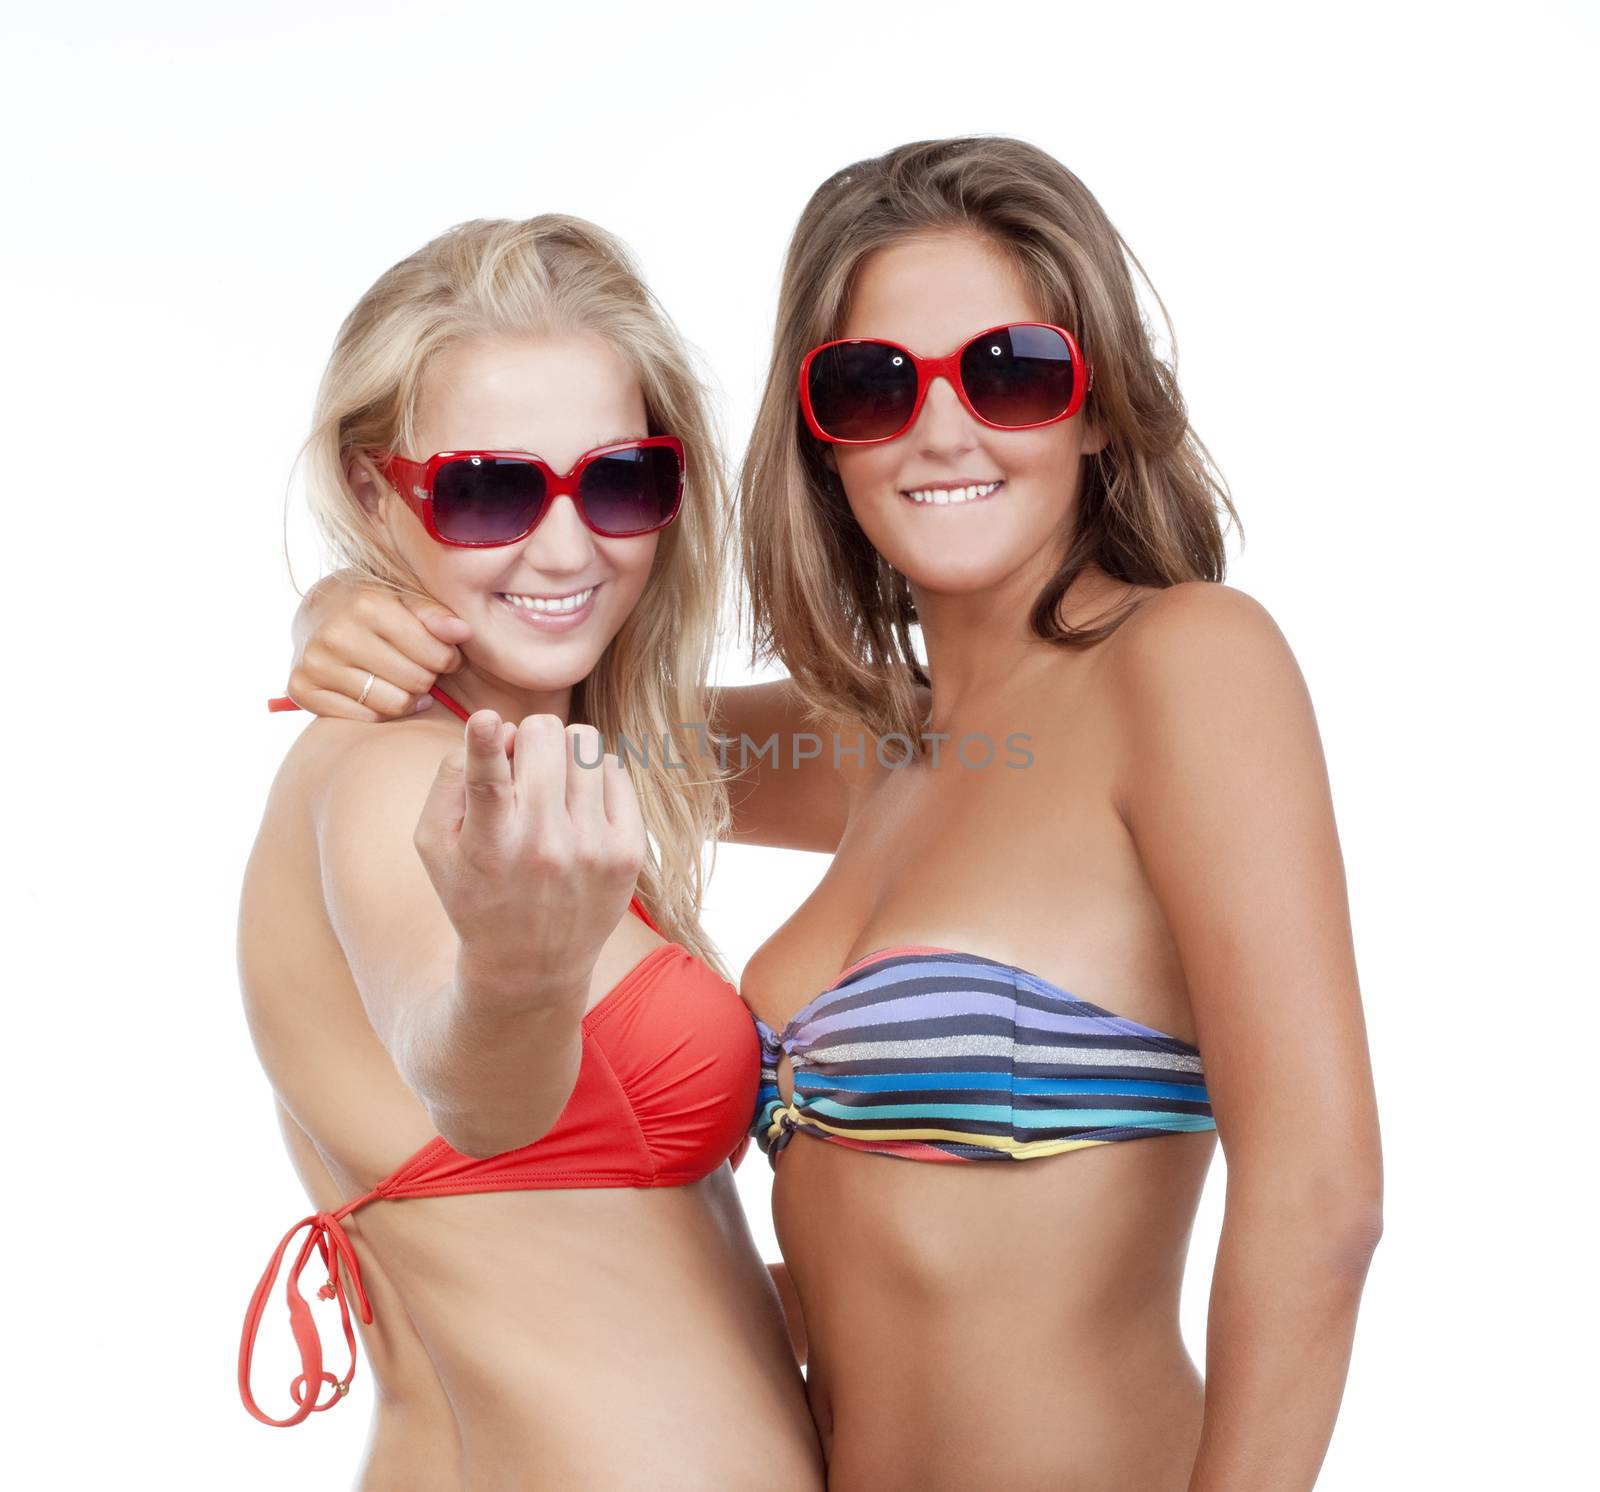 two young beautiful women in bikini tops showing come on gesture - isolated on white